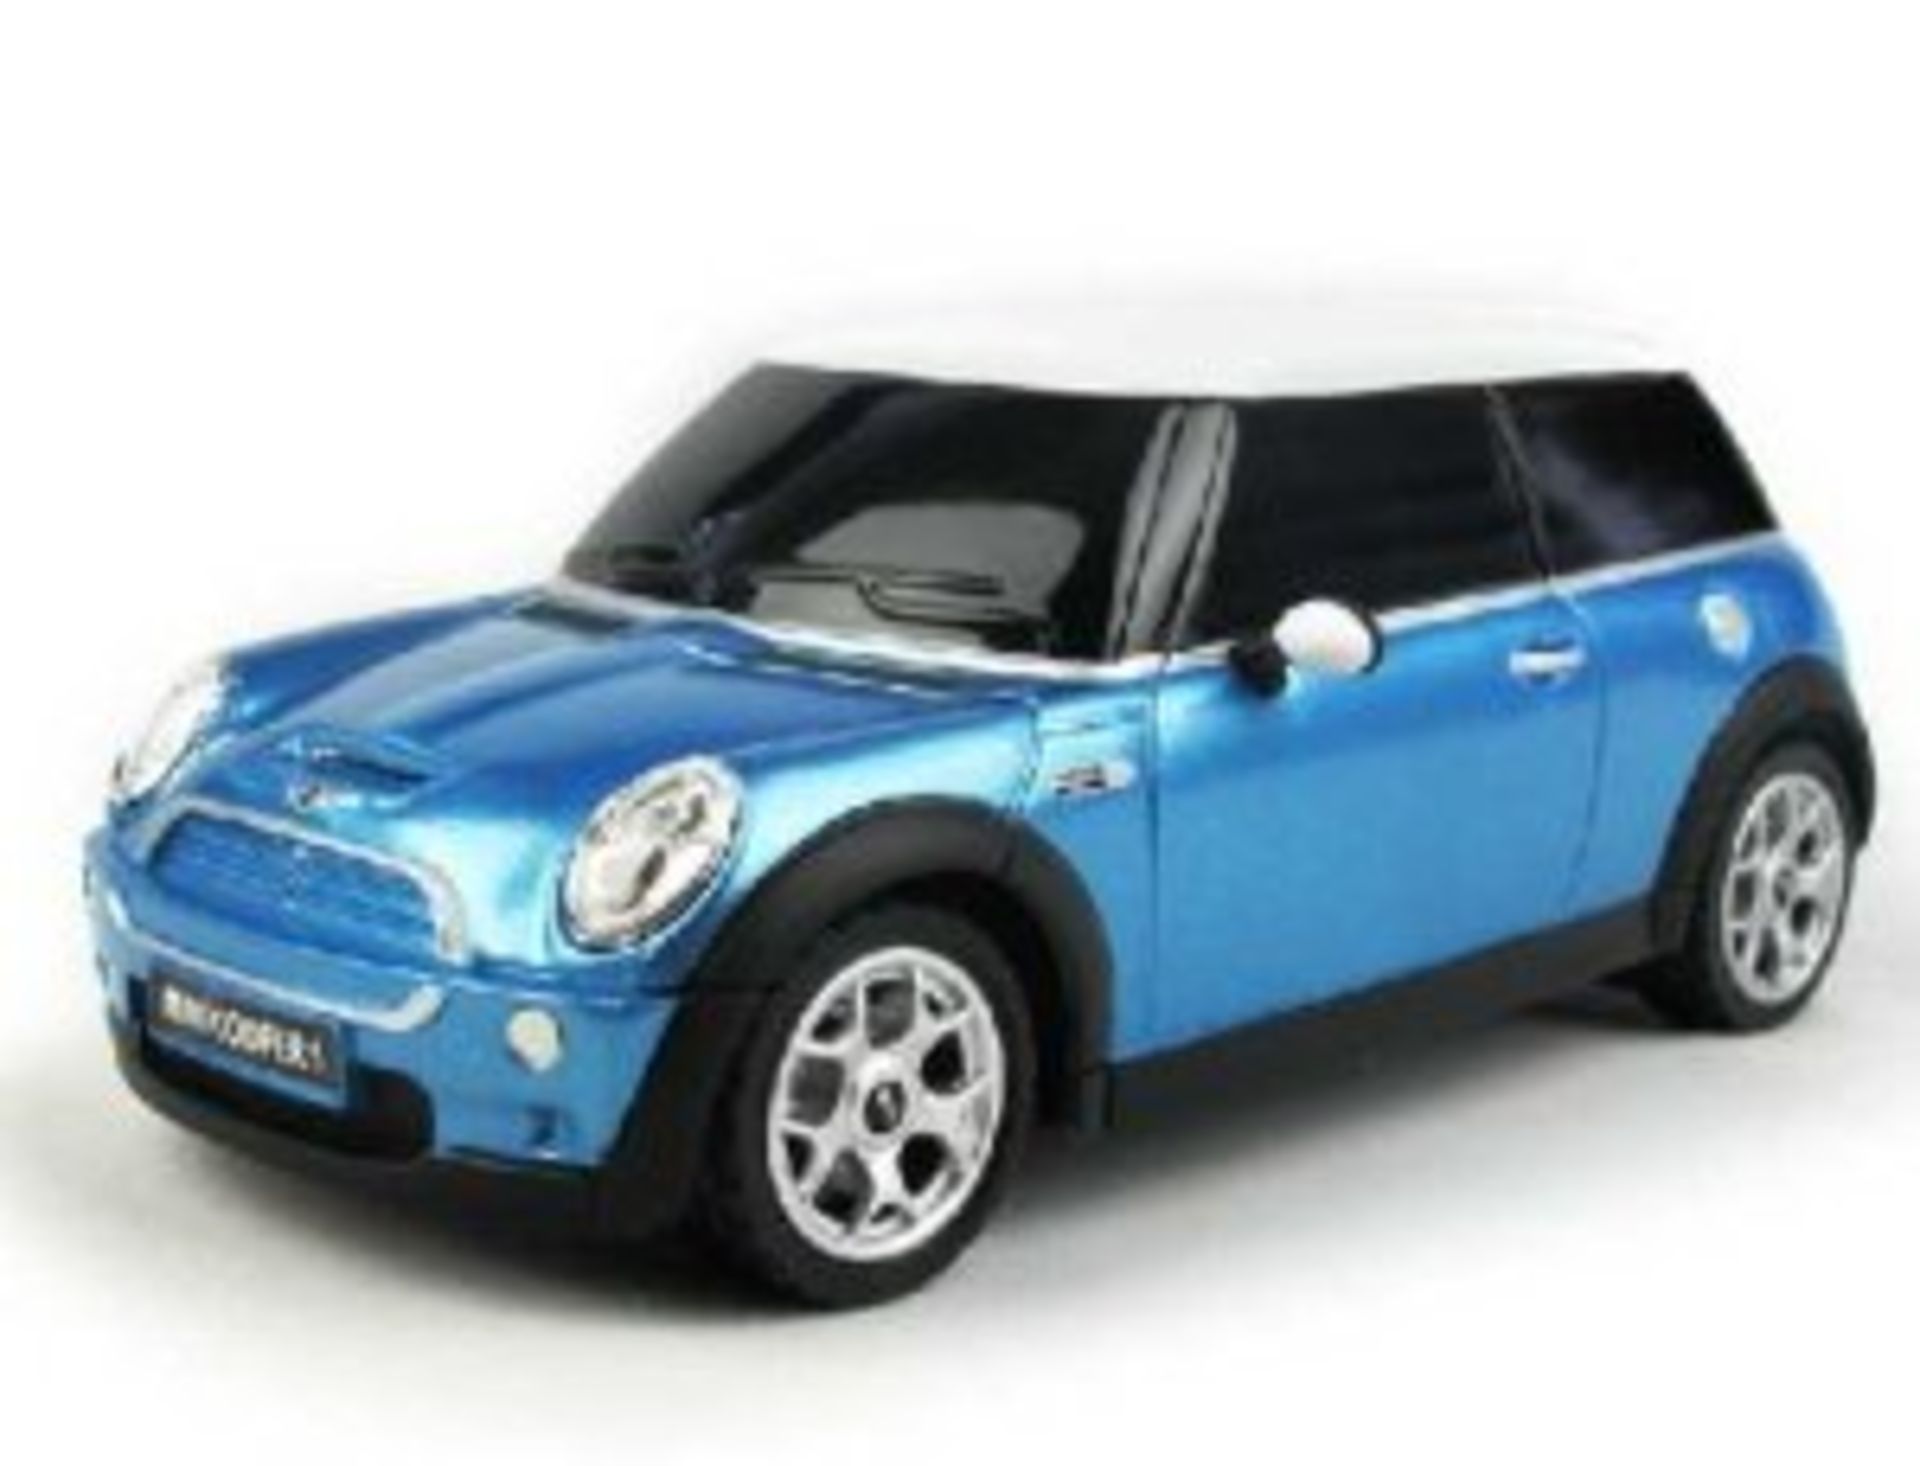 V *TRADE QTY* Brand New 1/24 RC Mini Cooper S Full Function Remote Control Car - Official - Image 2 of 2